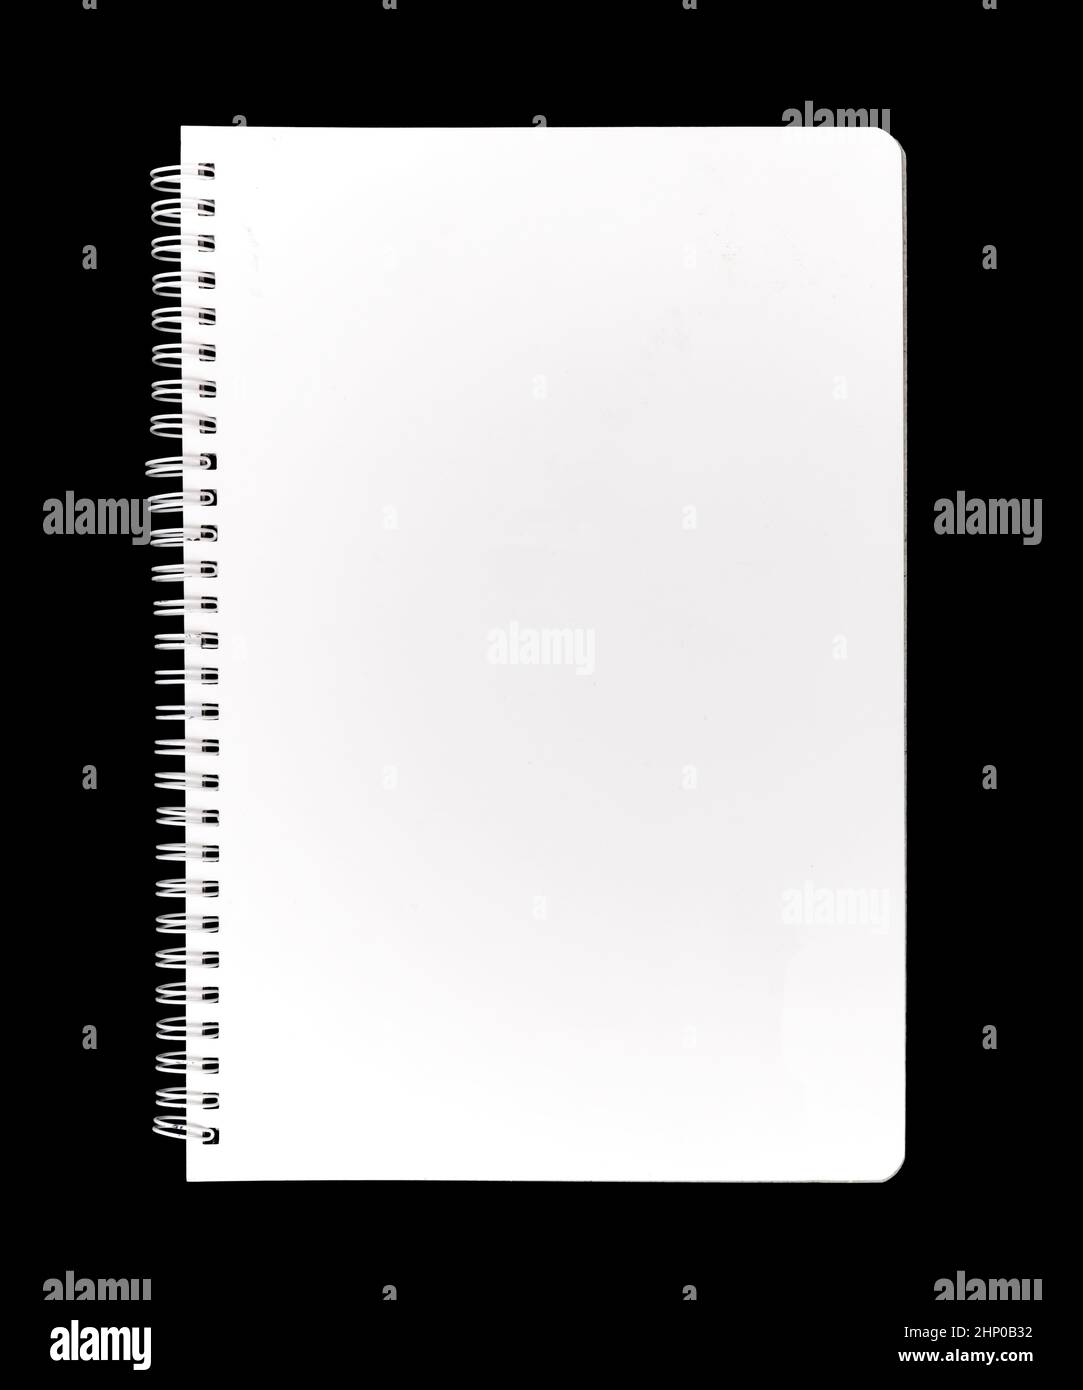 A closed notebook, with a blank empty white cover, isolated on a black background. Stock Photo